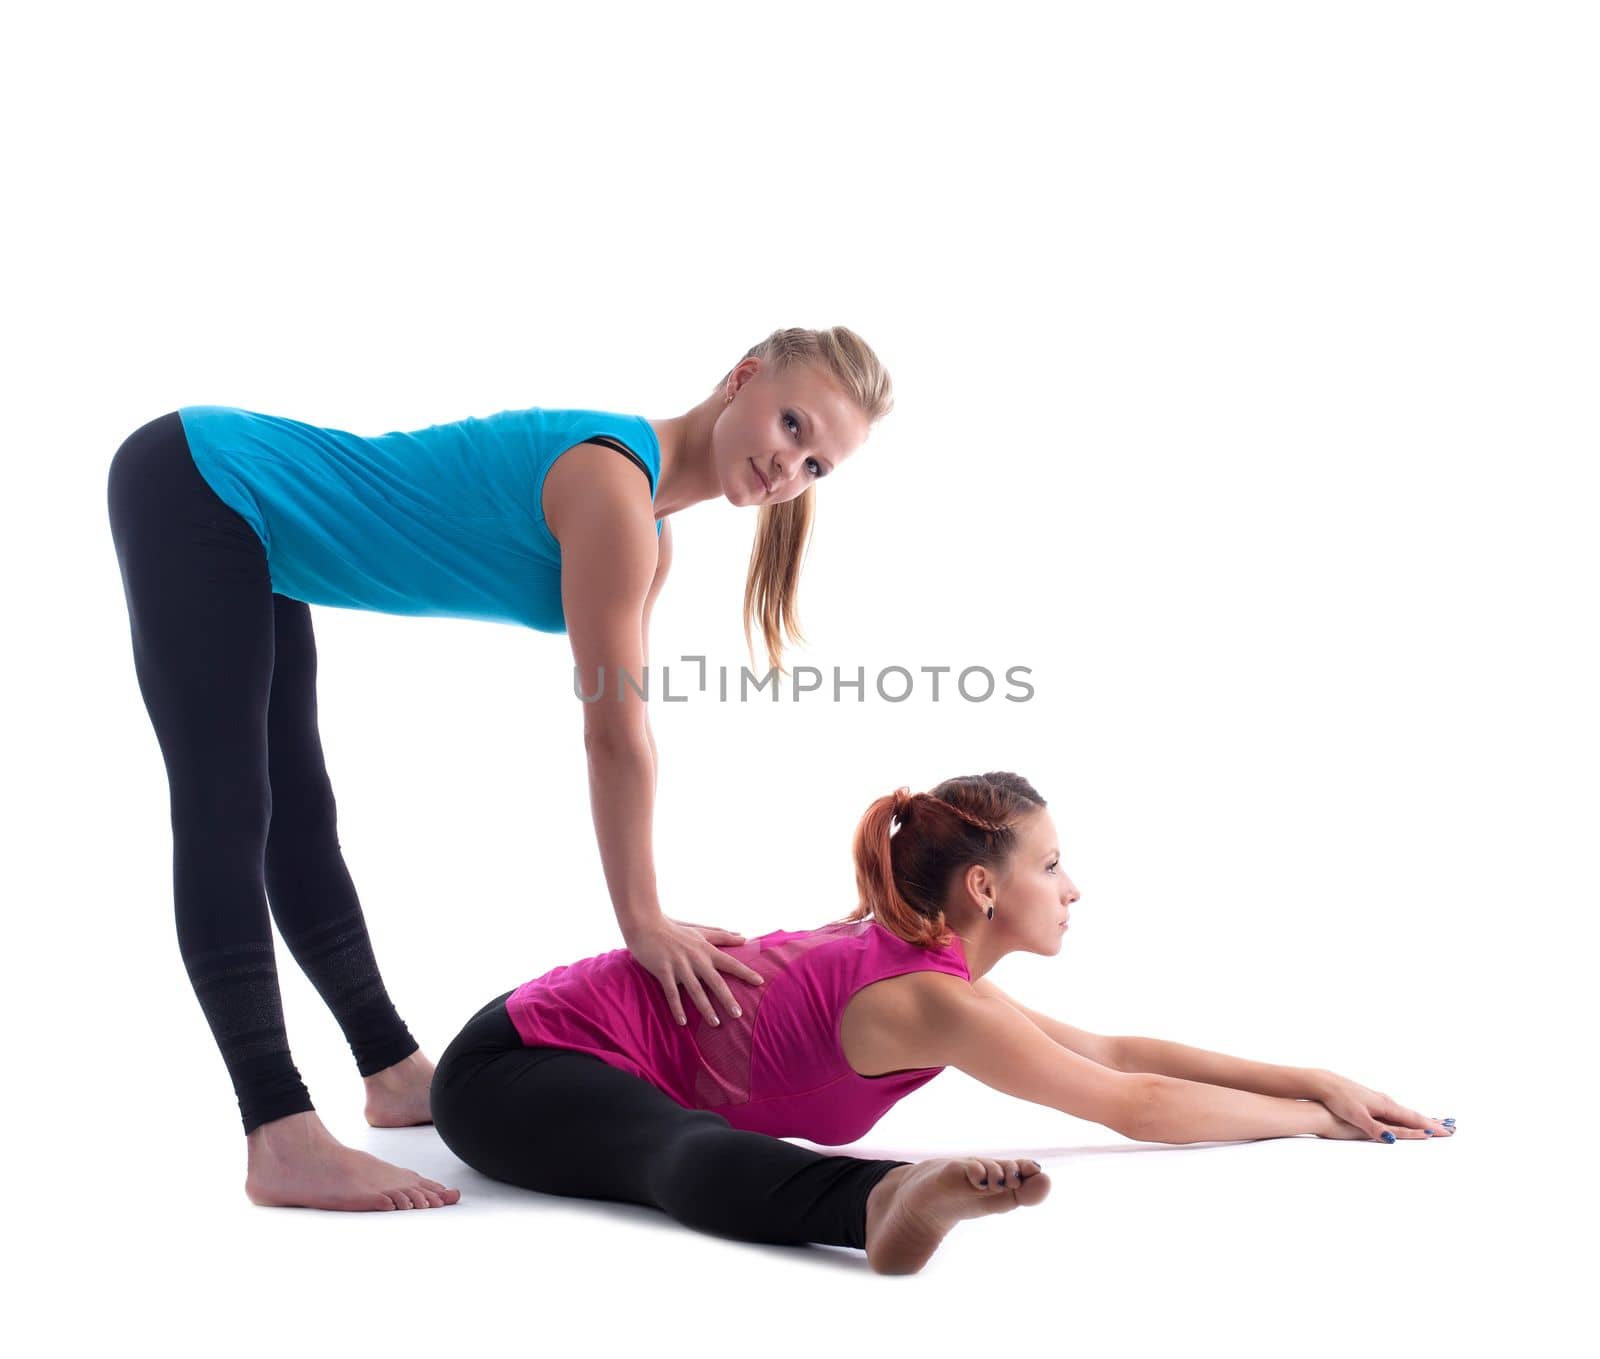 Two beauty women - fitness instructor doing stretch exercise isolated